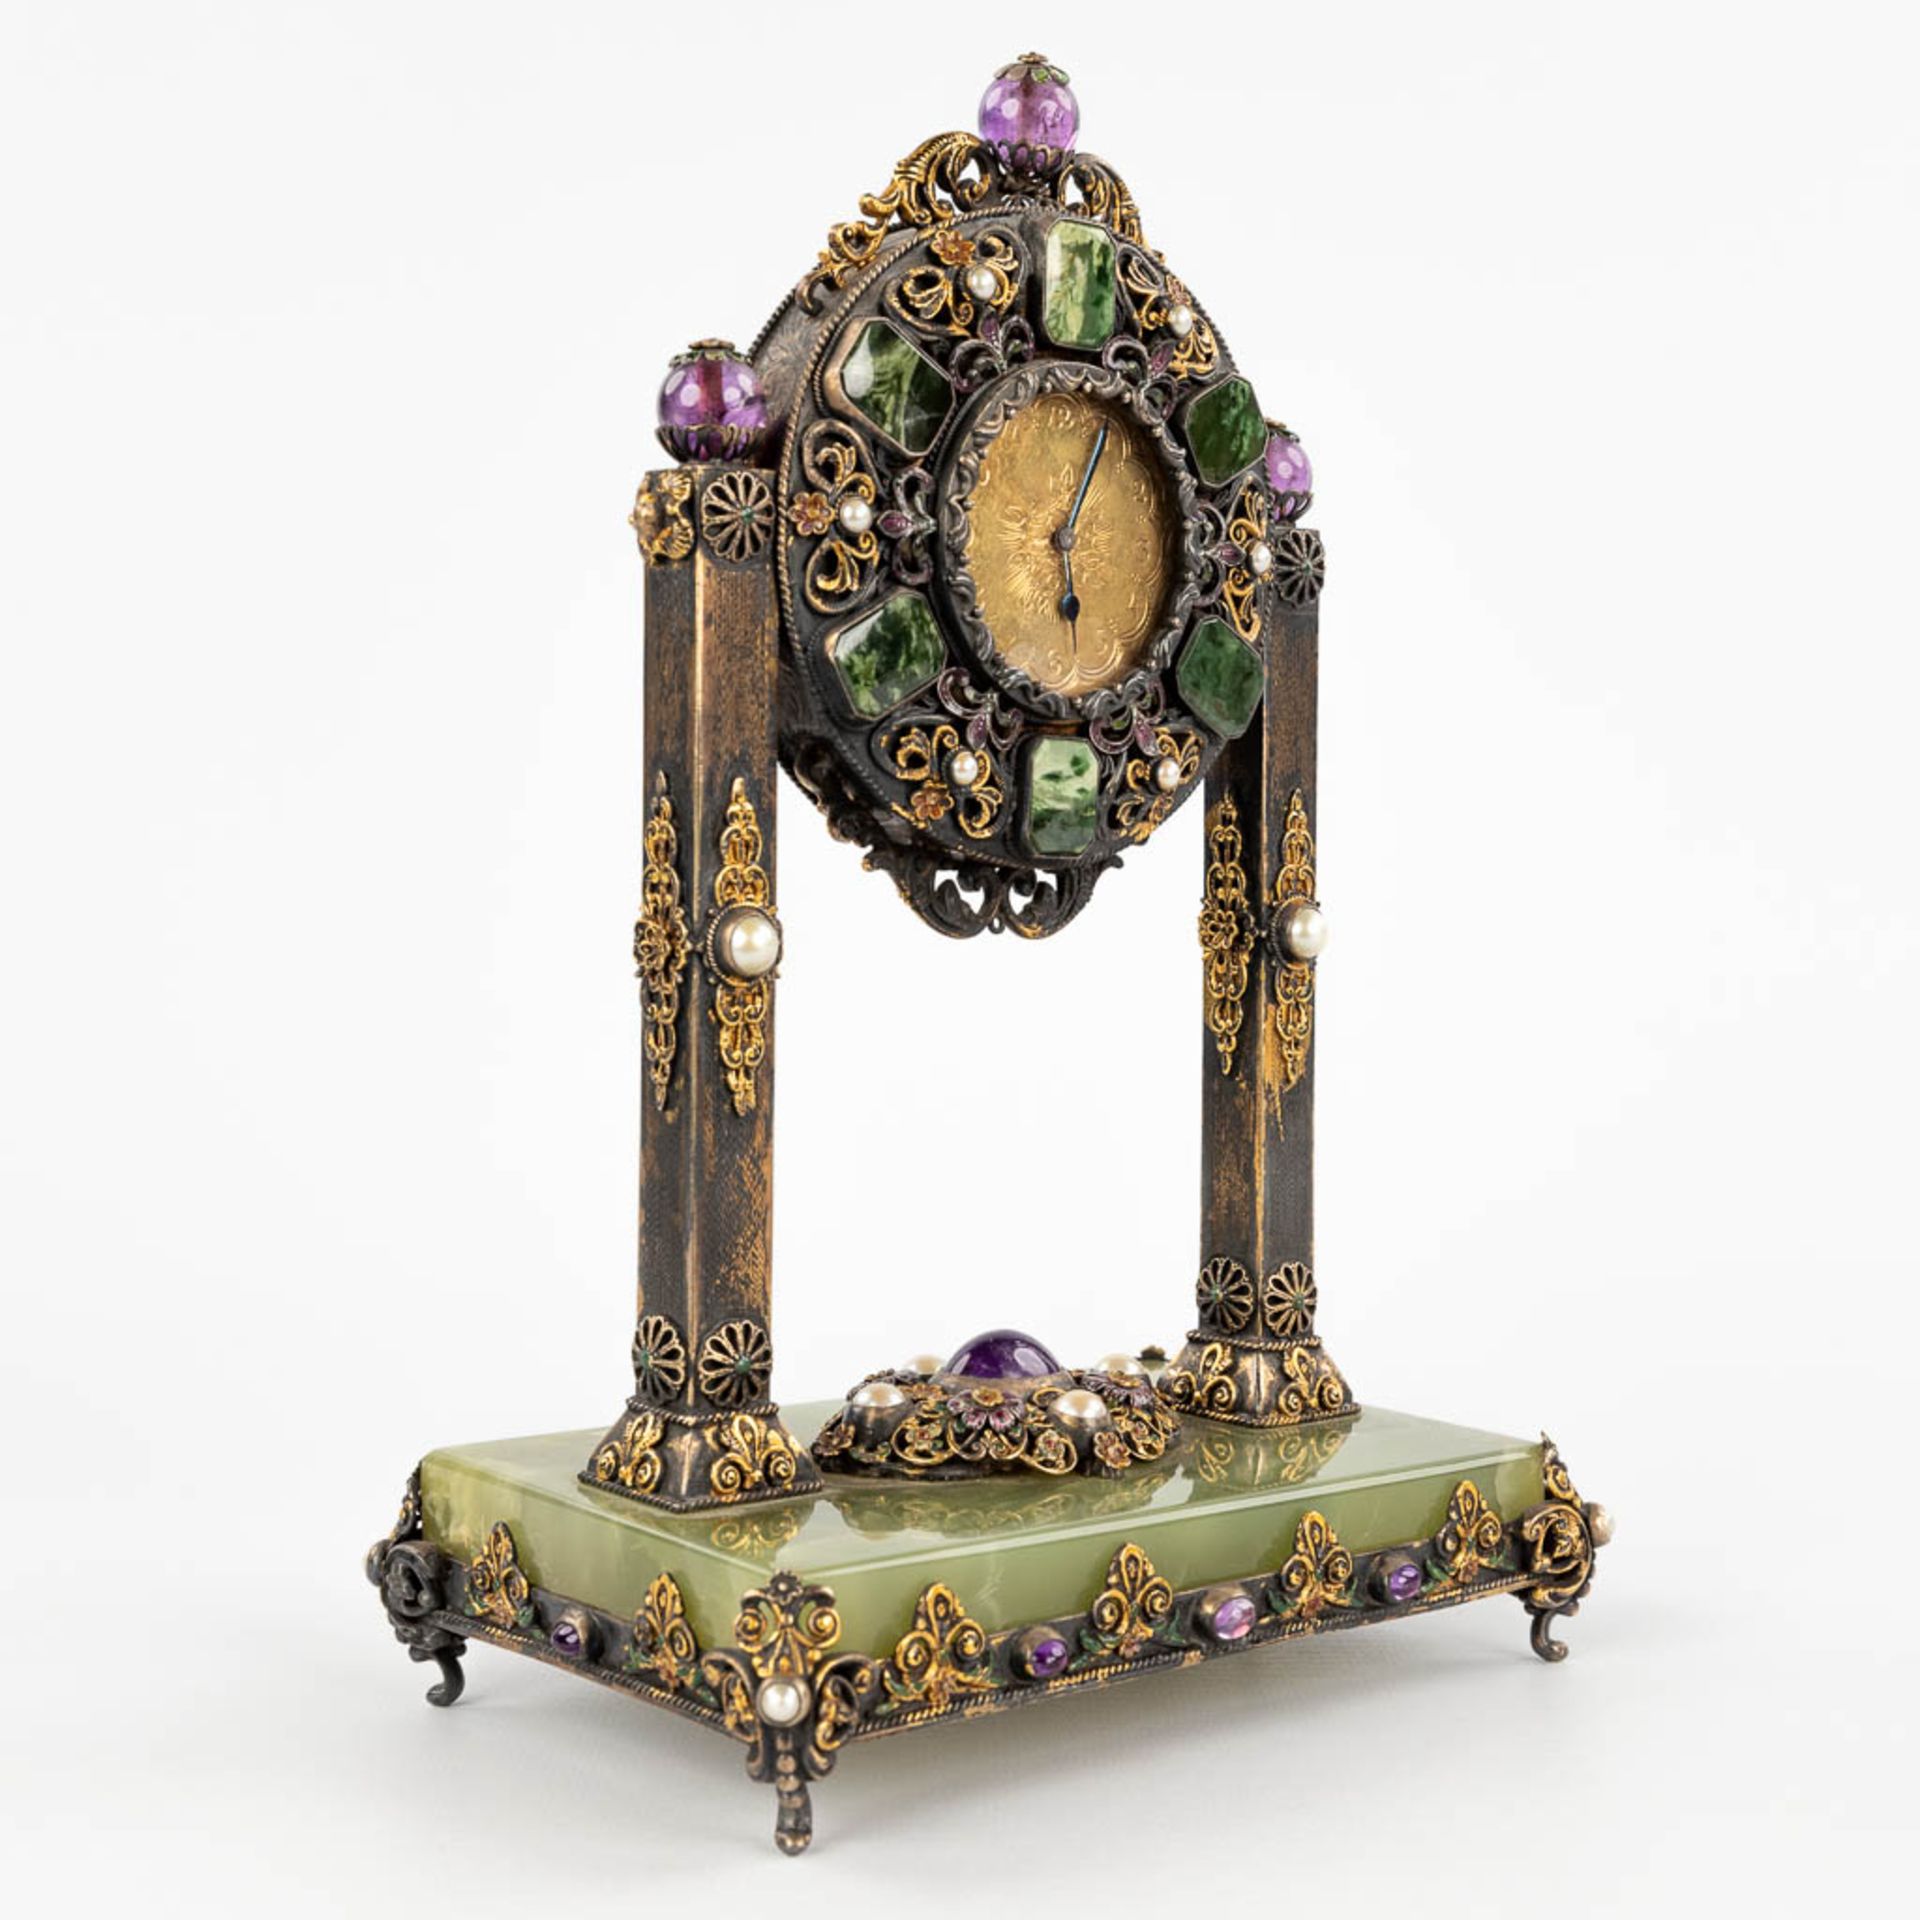 A mantle clock, silver and gold-plated metal and decorated with stone and onyx, pearls. Circa 1900. - Image 3 of 14